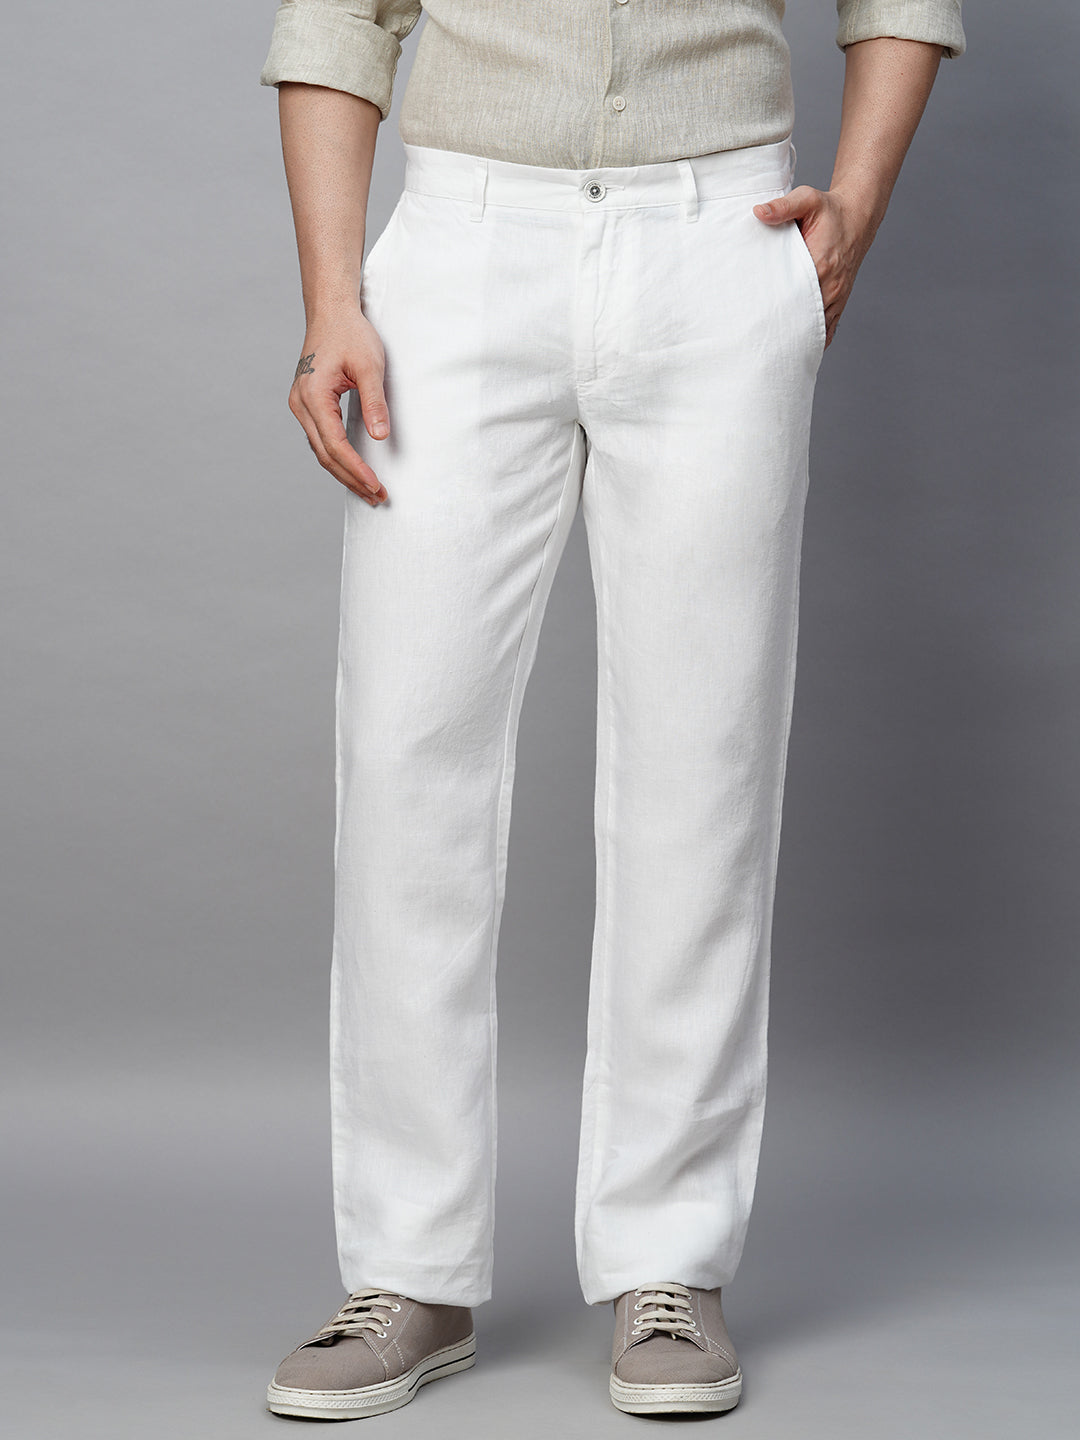 Buy men linen white pants in India @ Limeroad | page 2